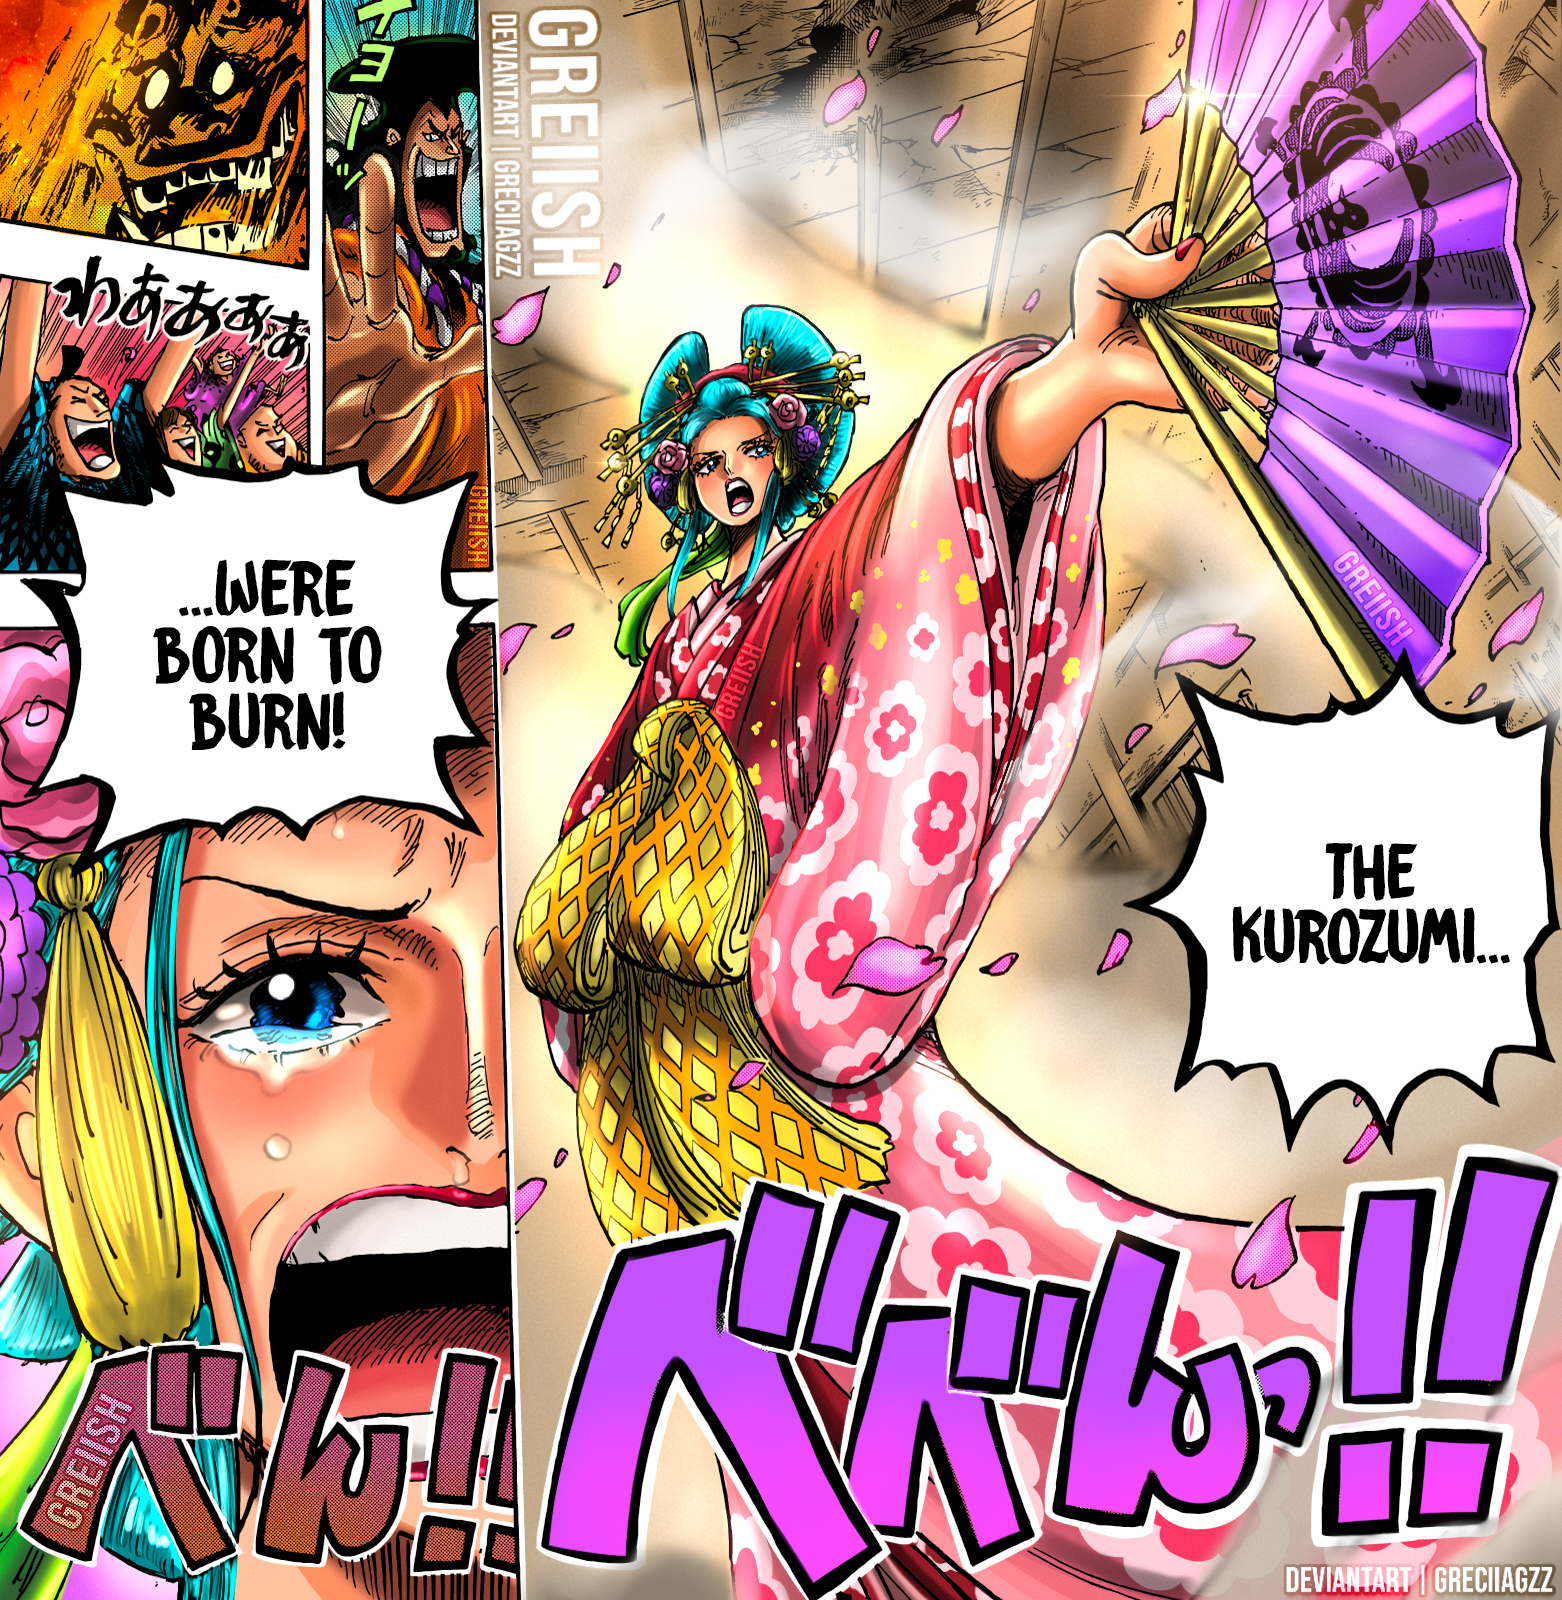 Coloring of One Piece Chapter 1058. - Eiichiro Oda by badhri27 on DeviantArt